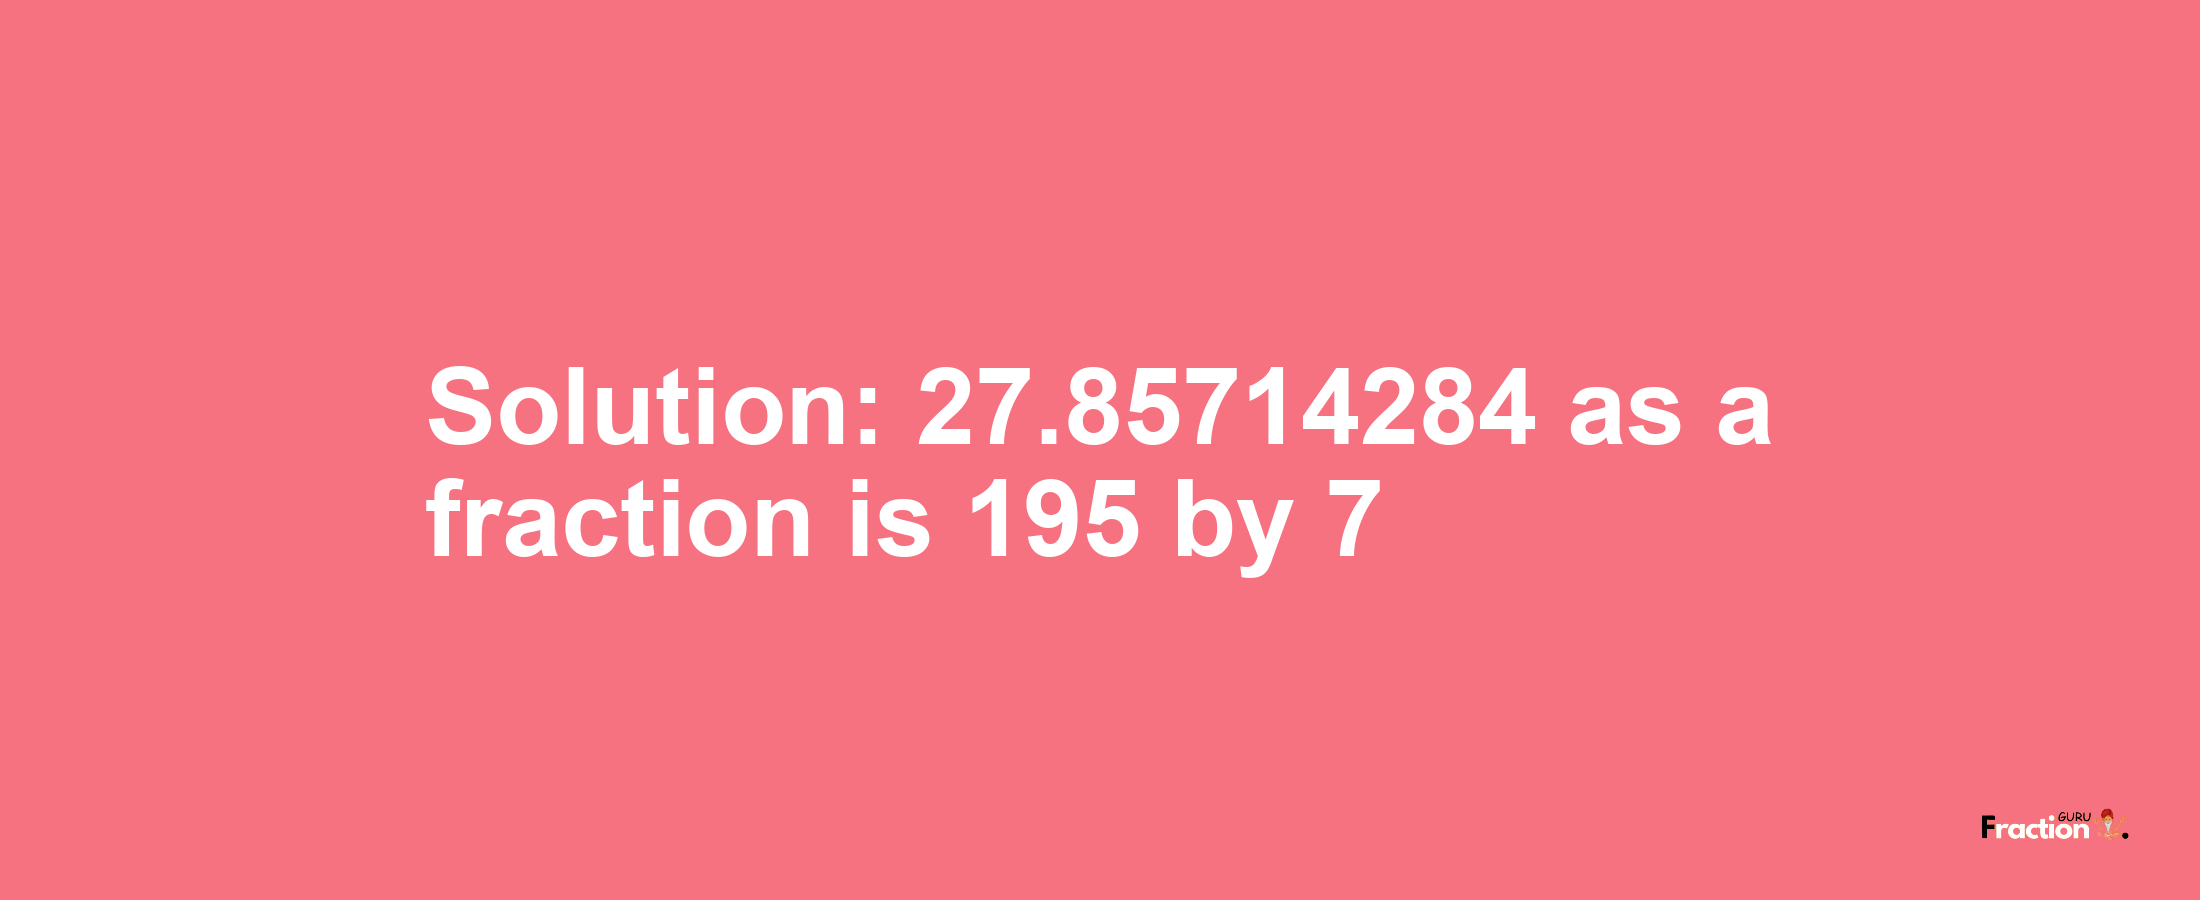 Solution:27.85714284 as a fraction is 195/7